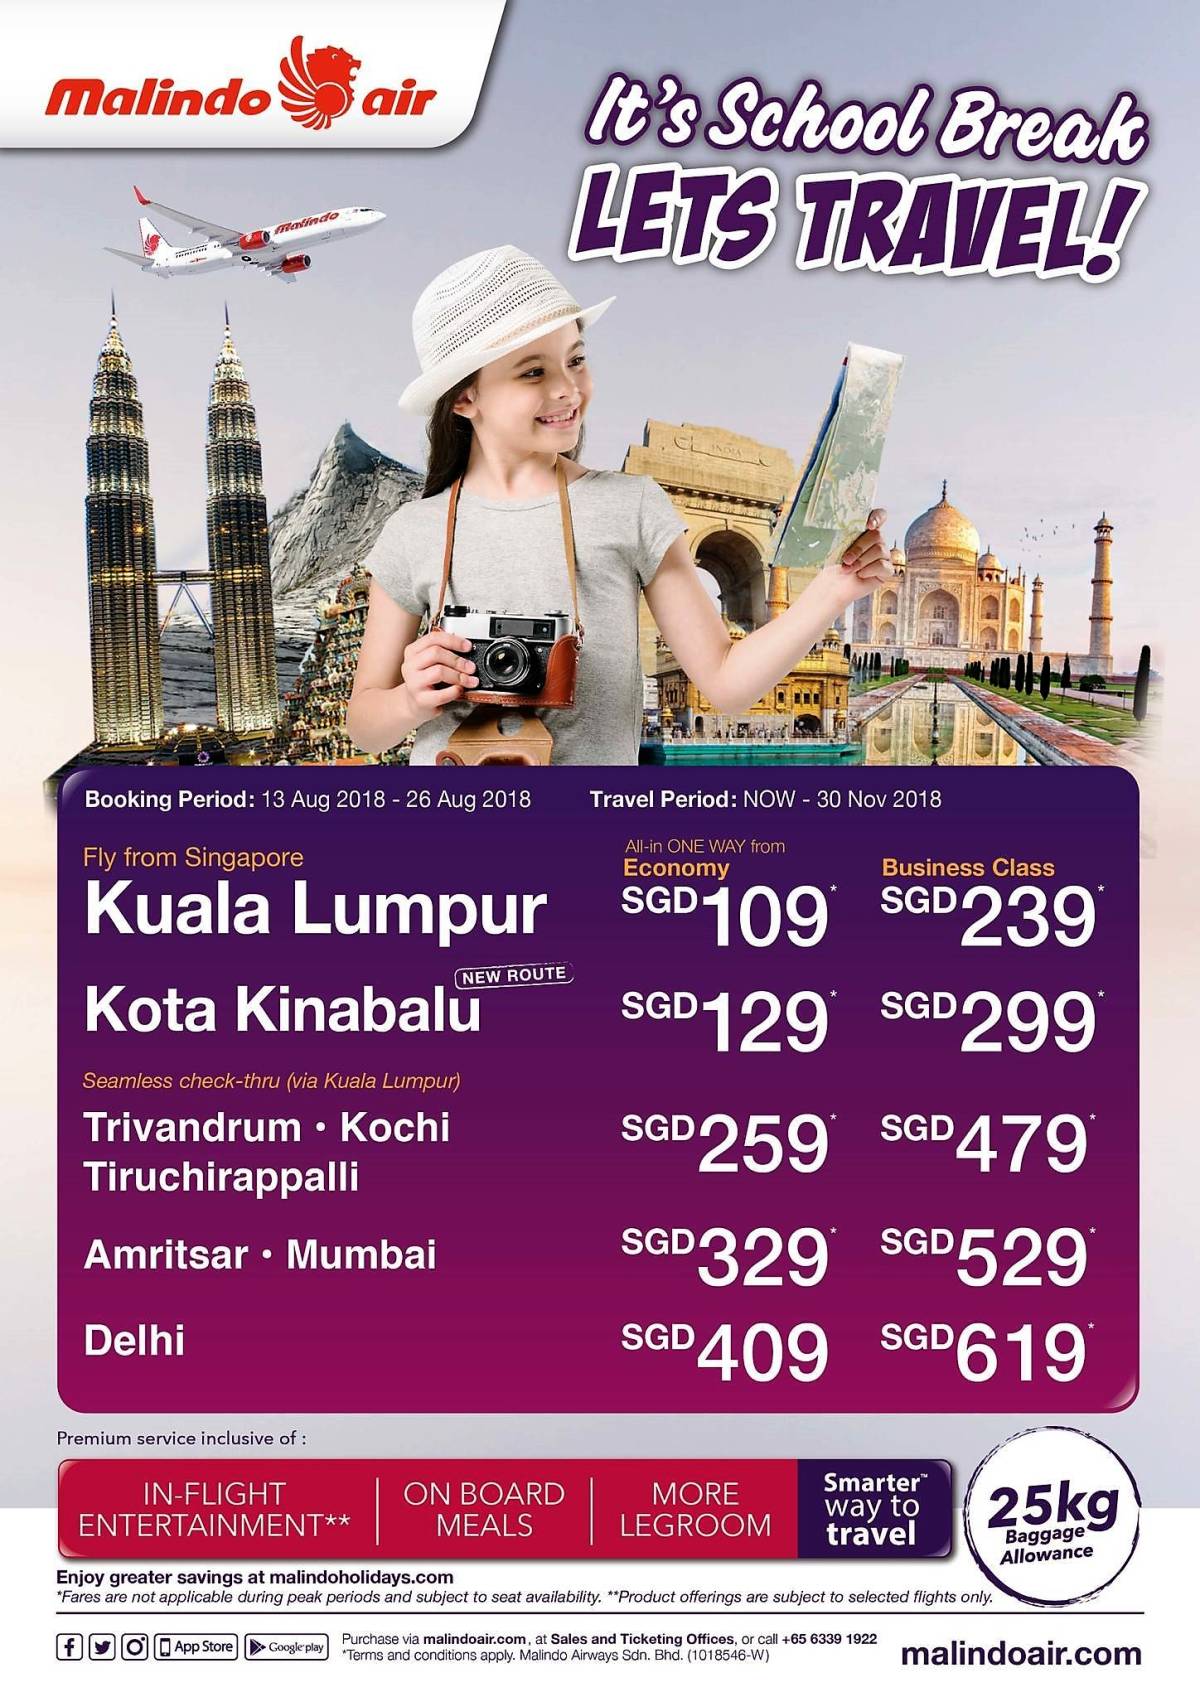 Special Prices on Malindo